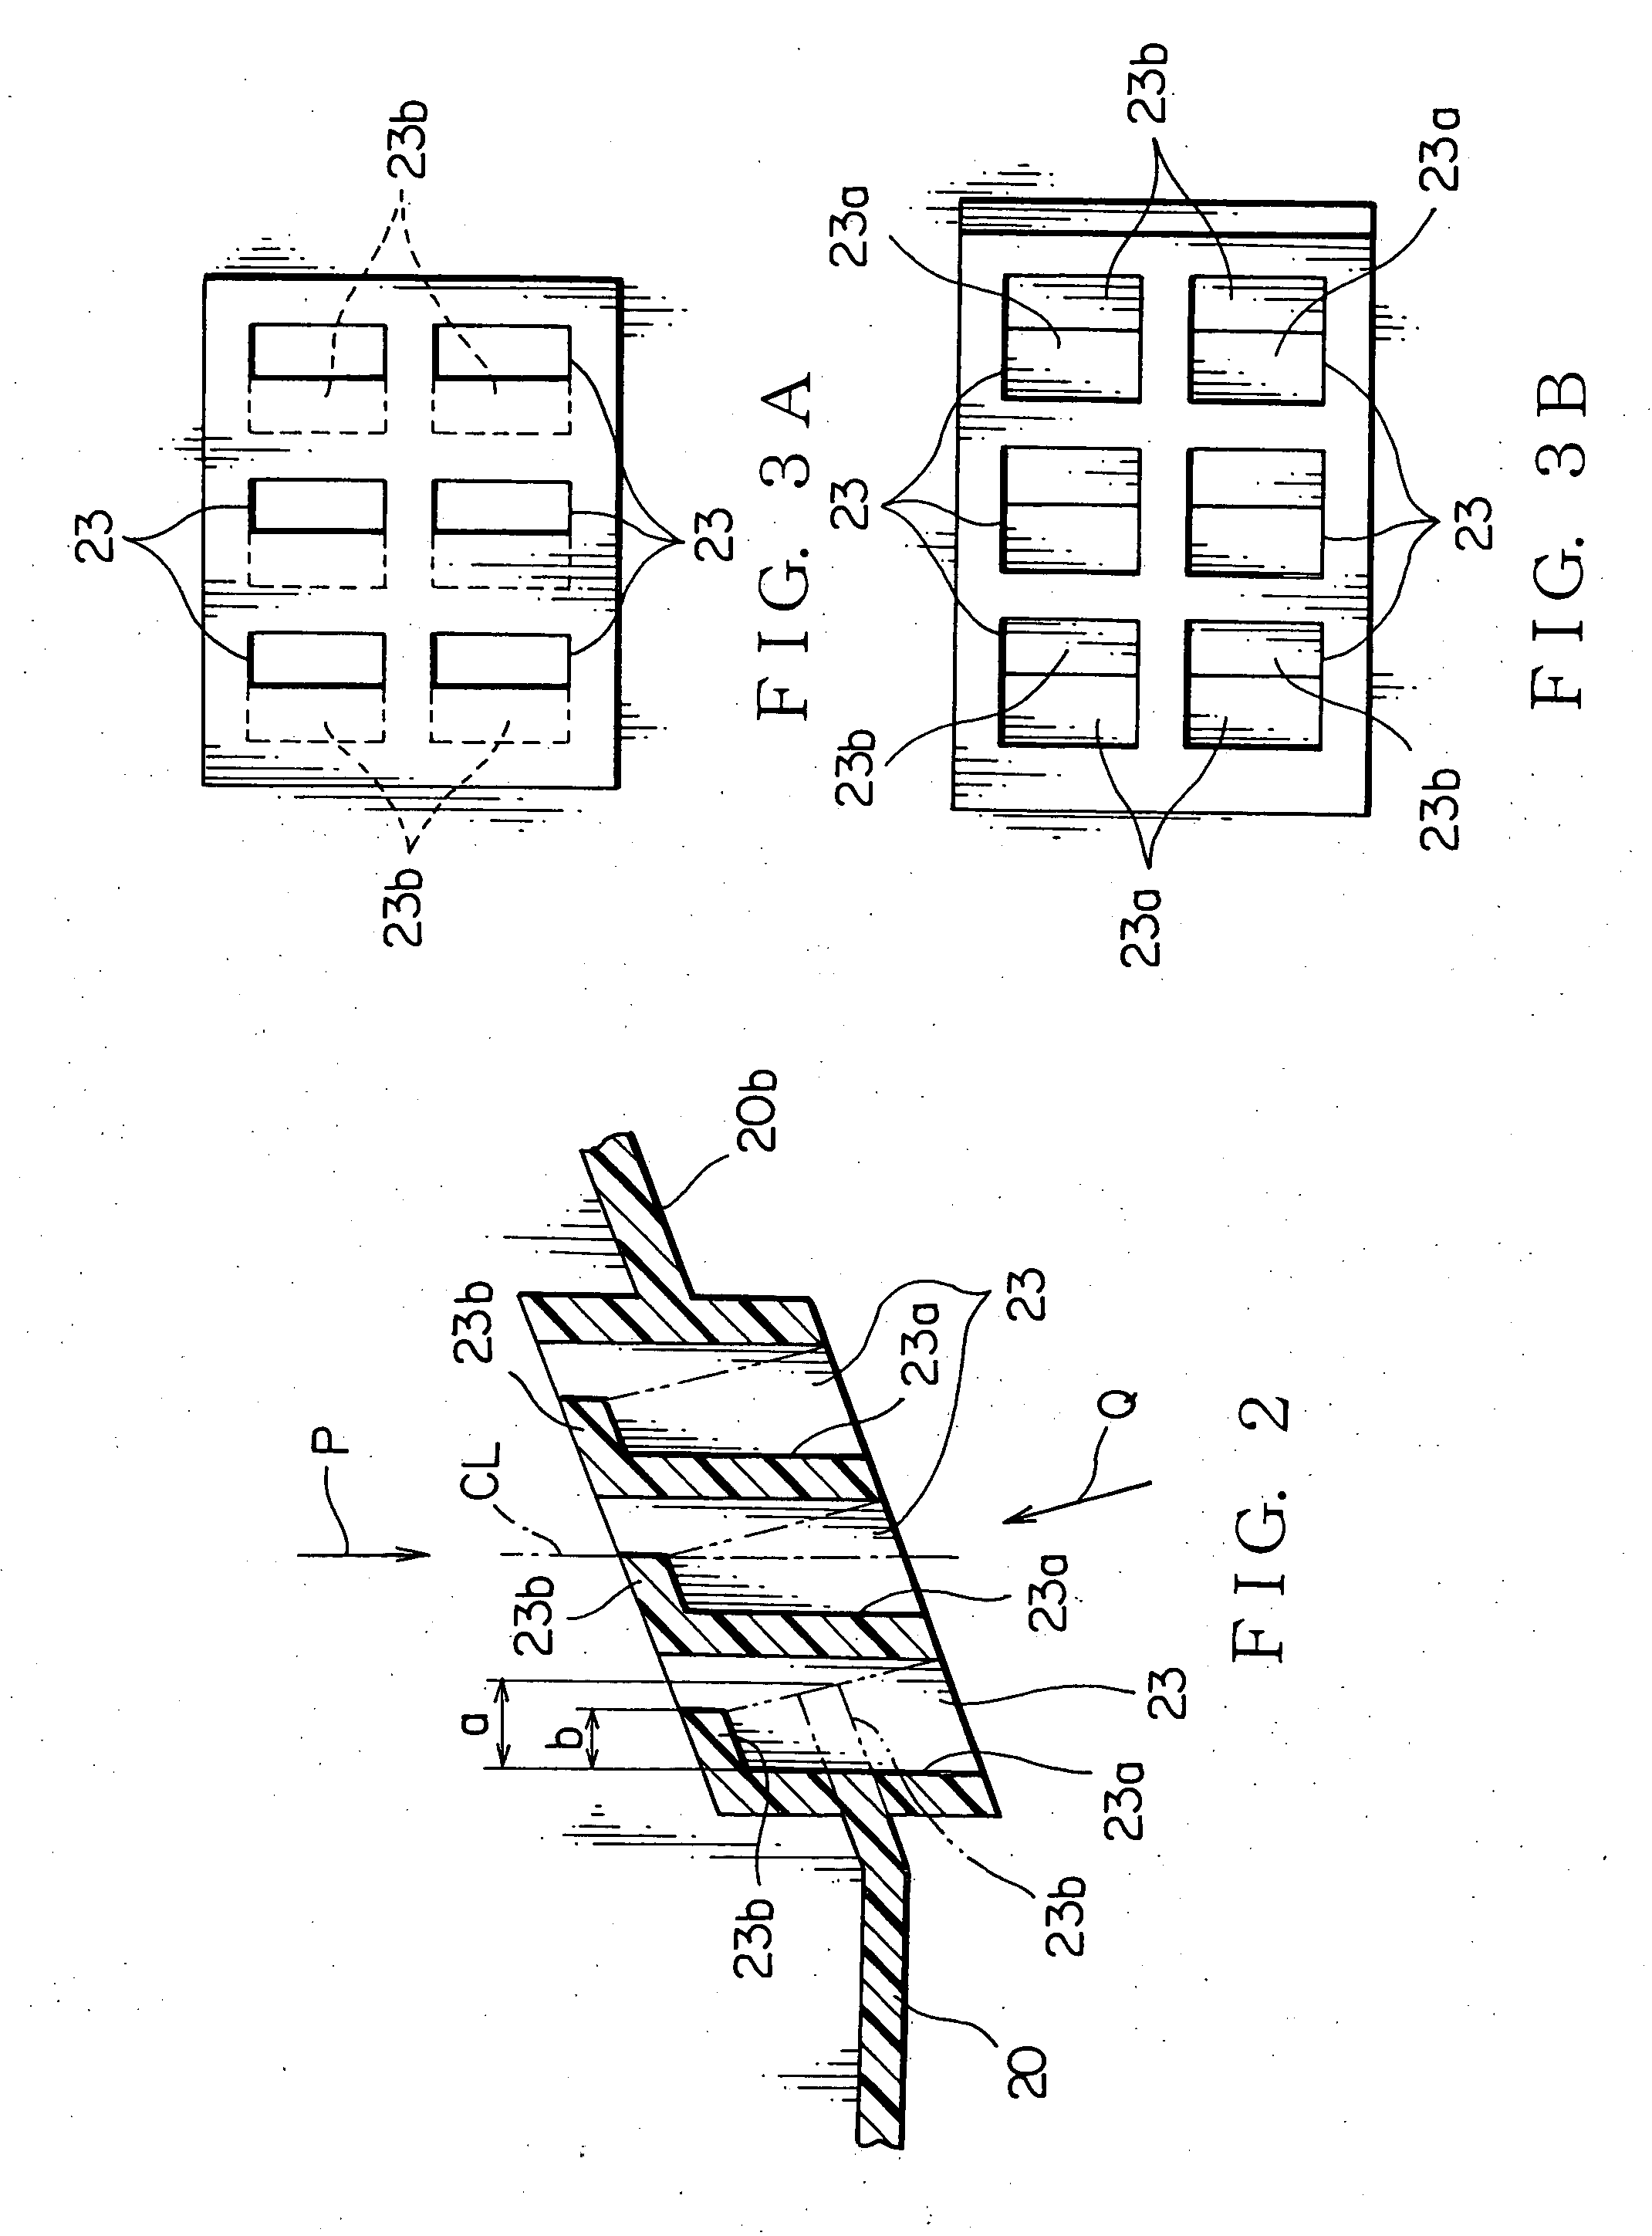 Waterproof structure of junction box